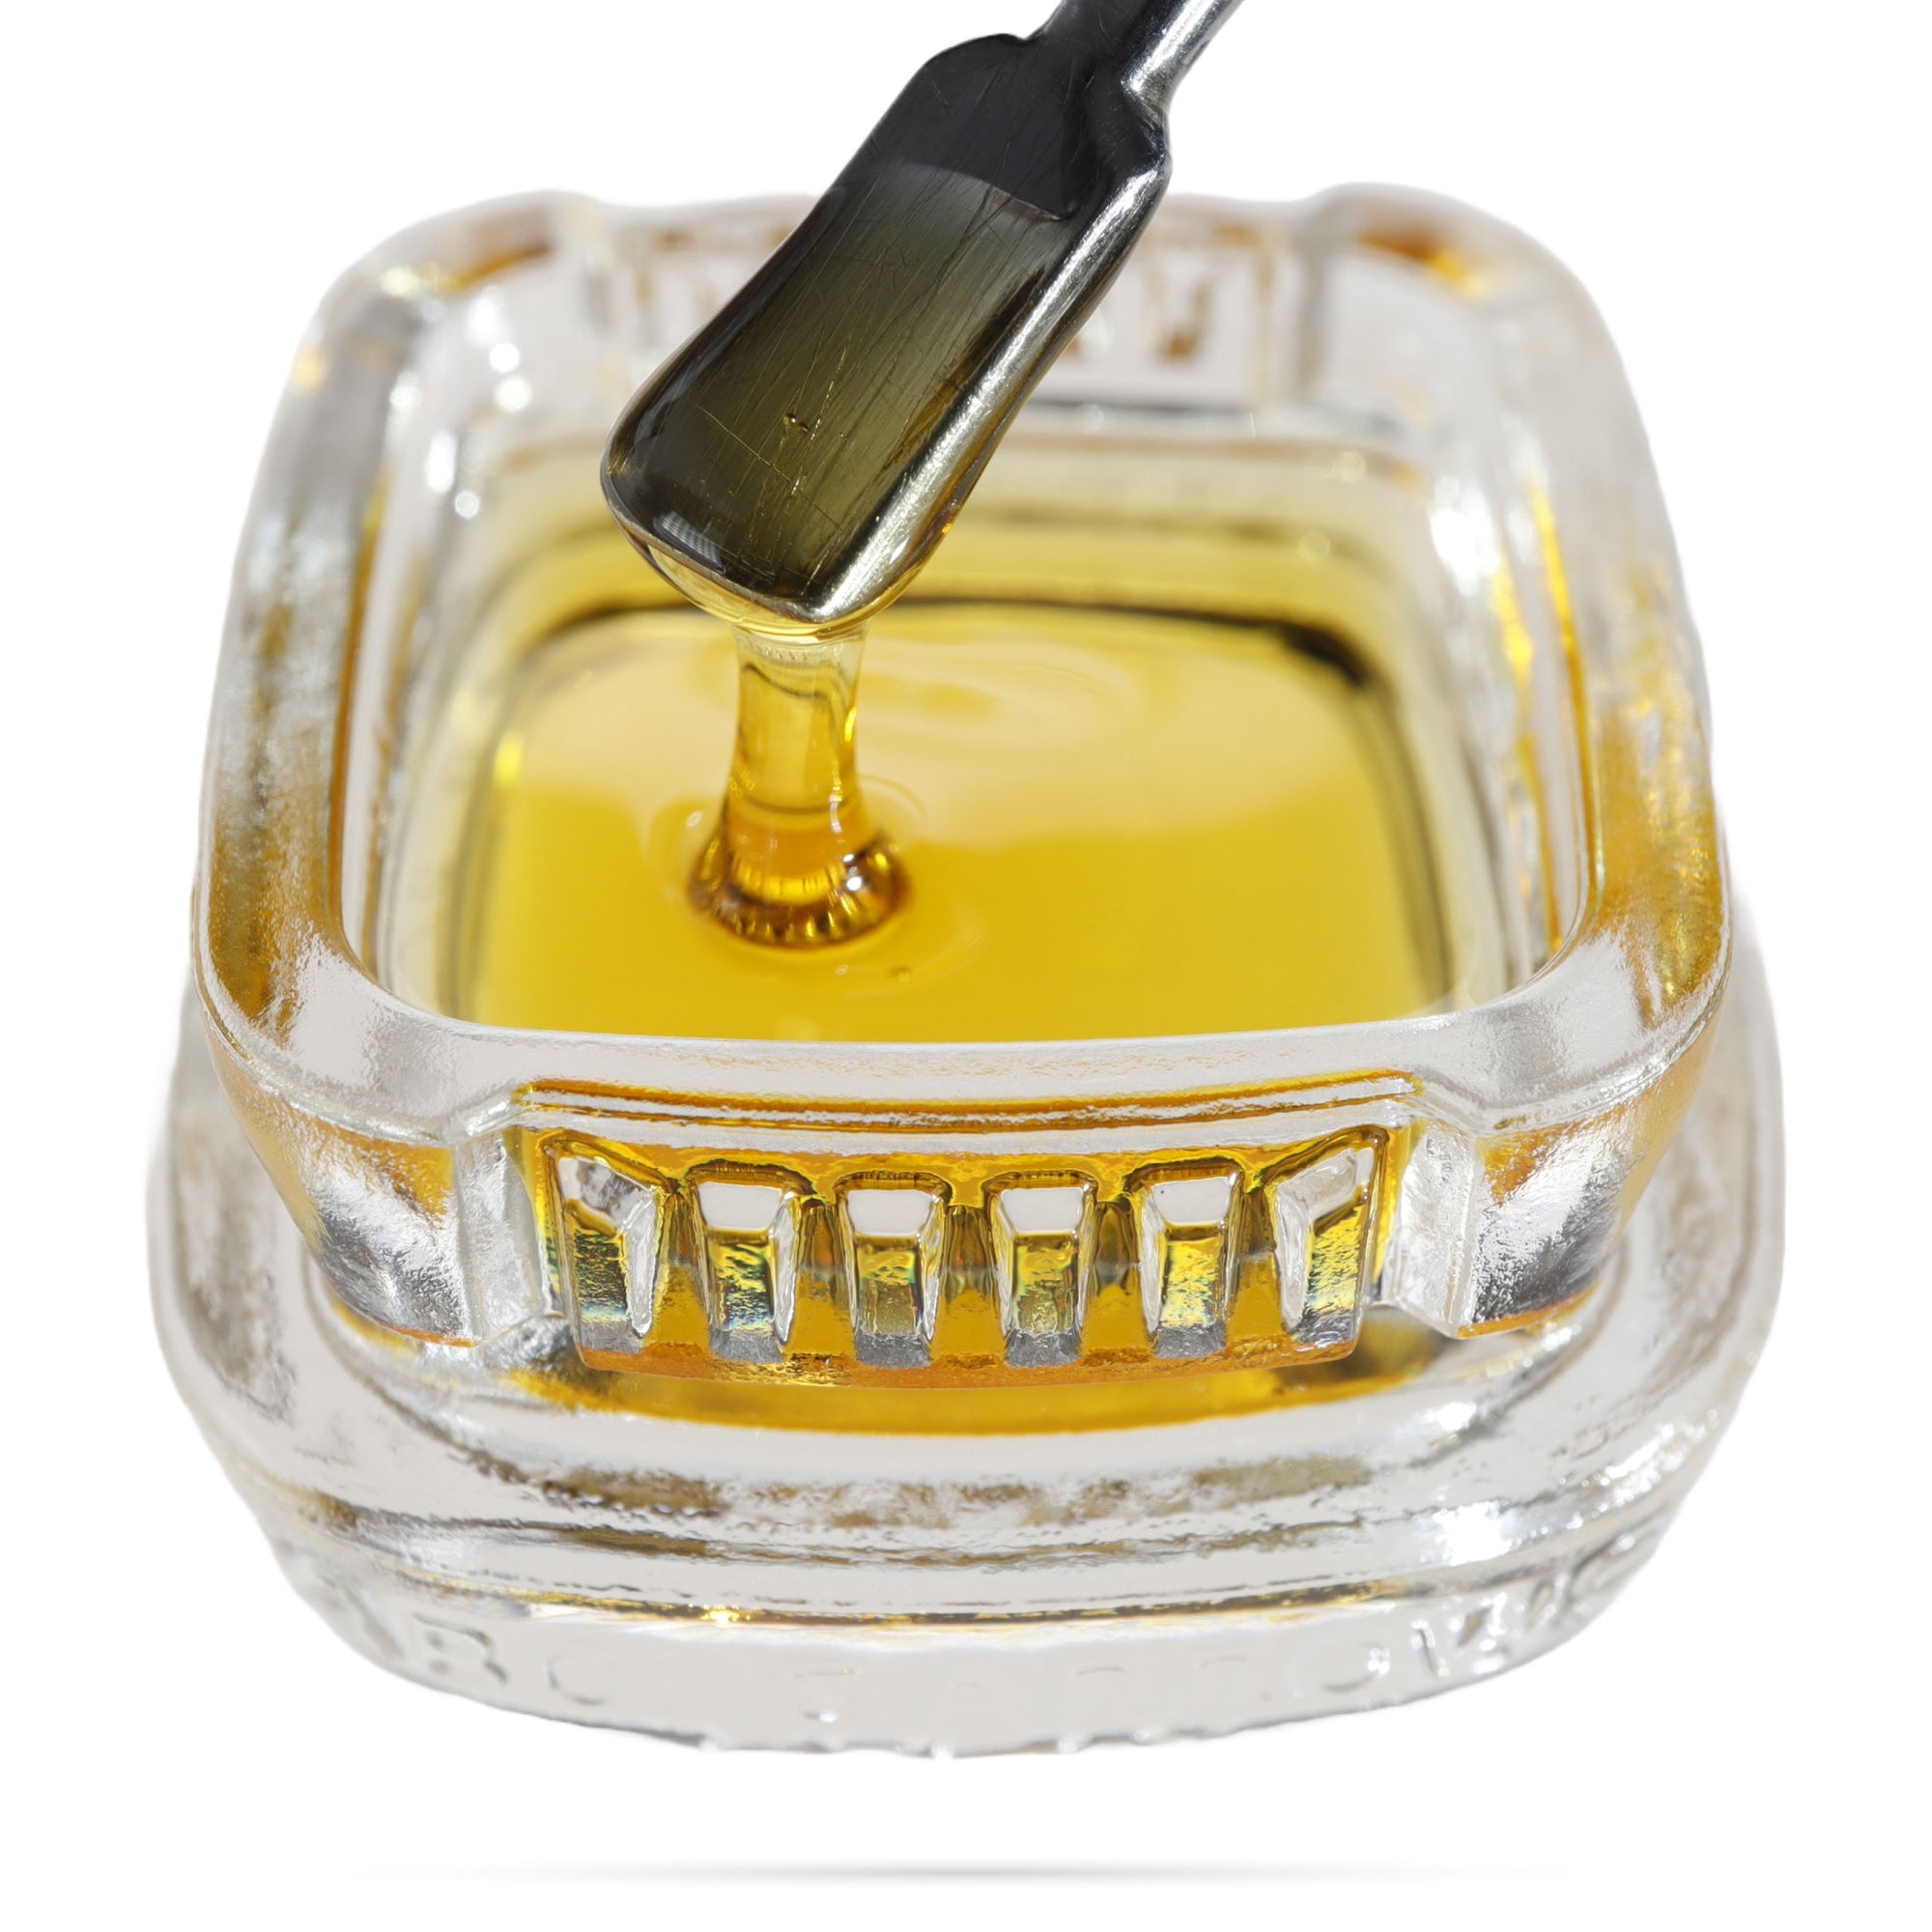 Image of OG Kush CBD Live Resin dripping from a dab tool into a calyx concentrate container